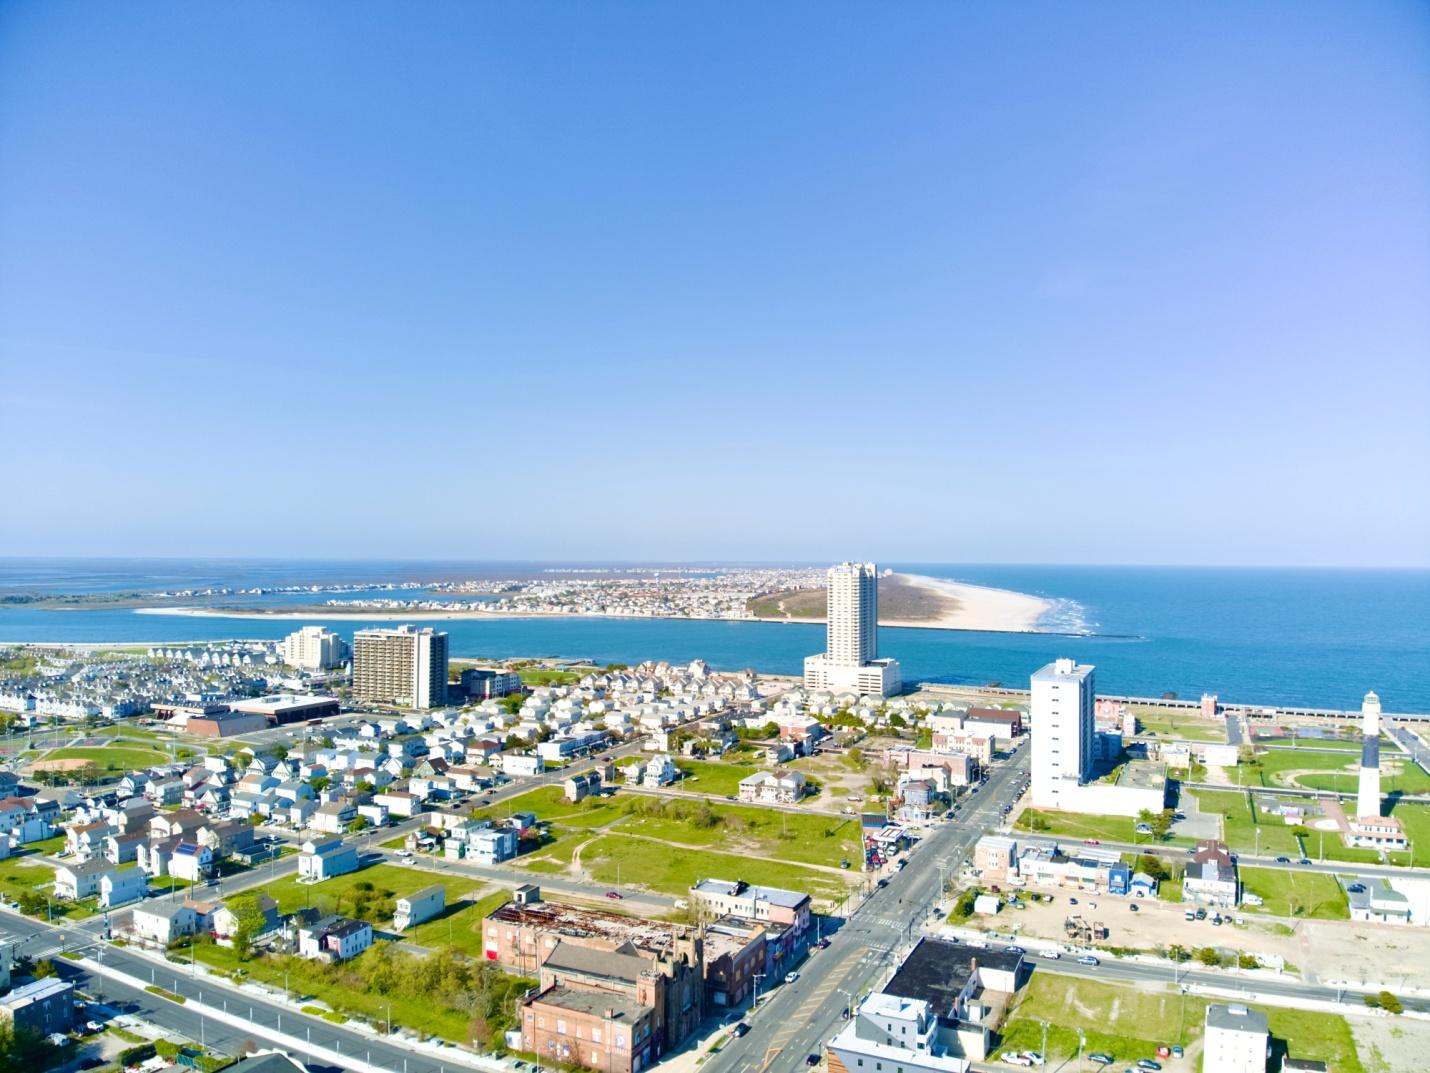 Unwind away from the crowds in Atlantic City